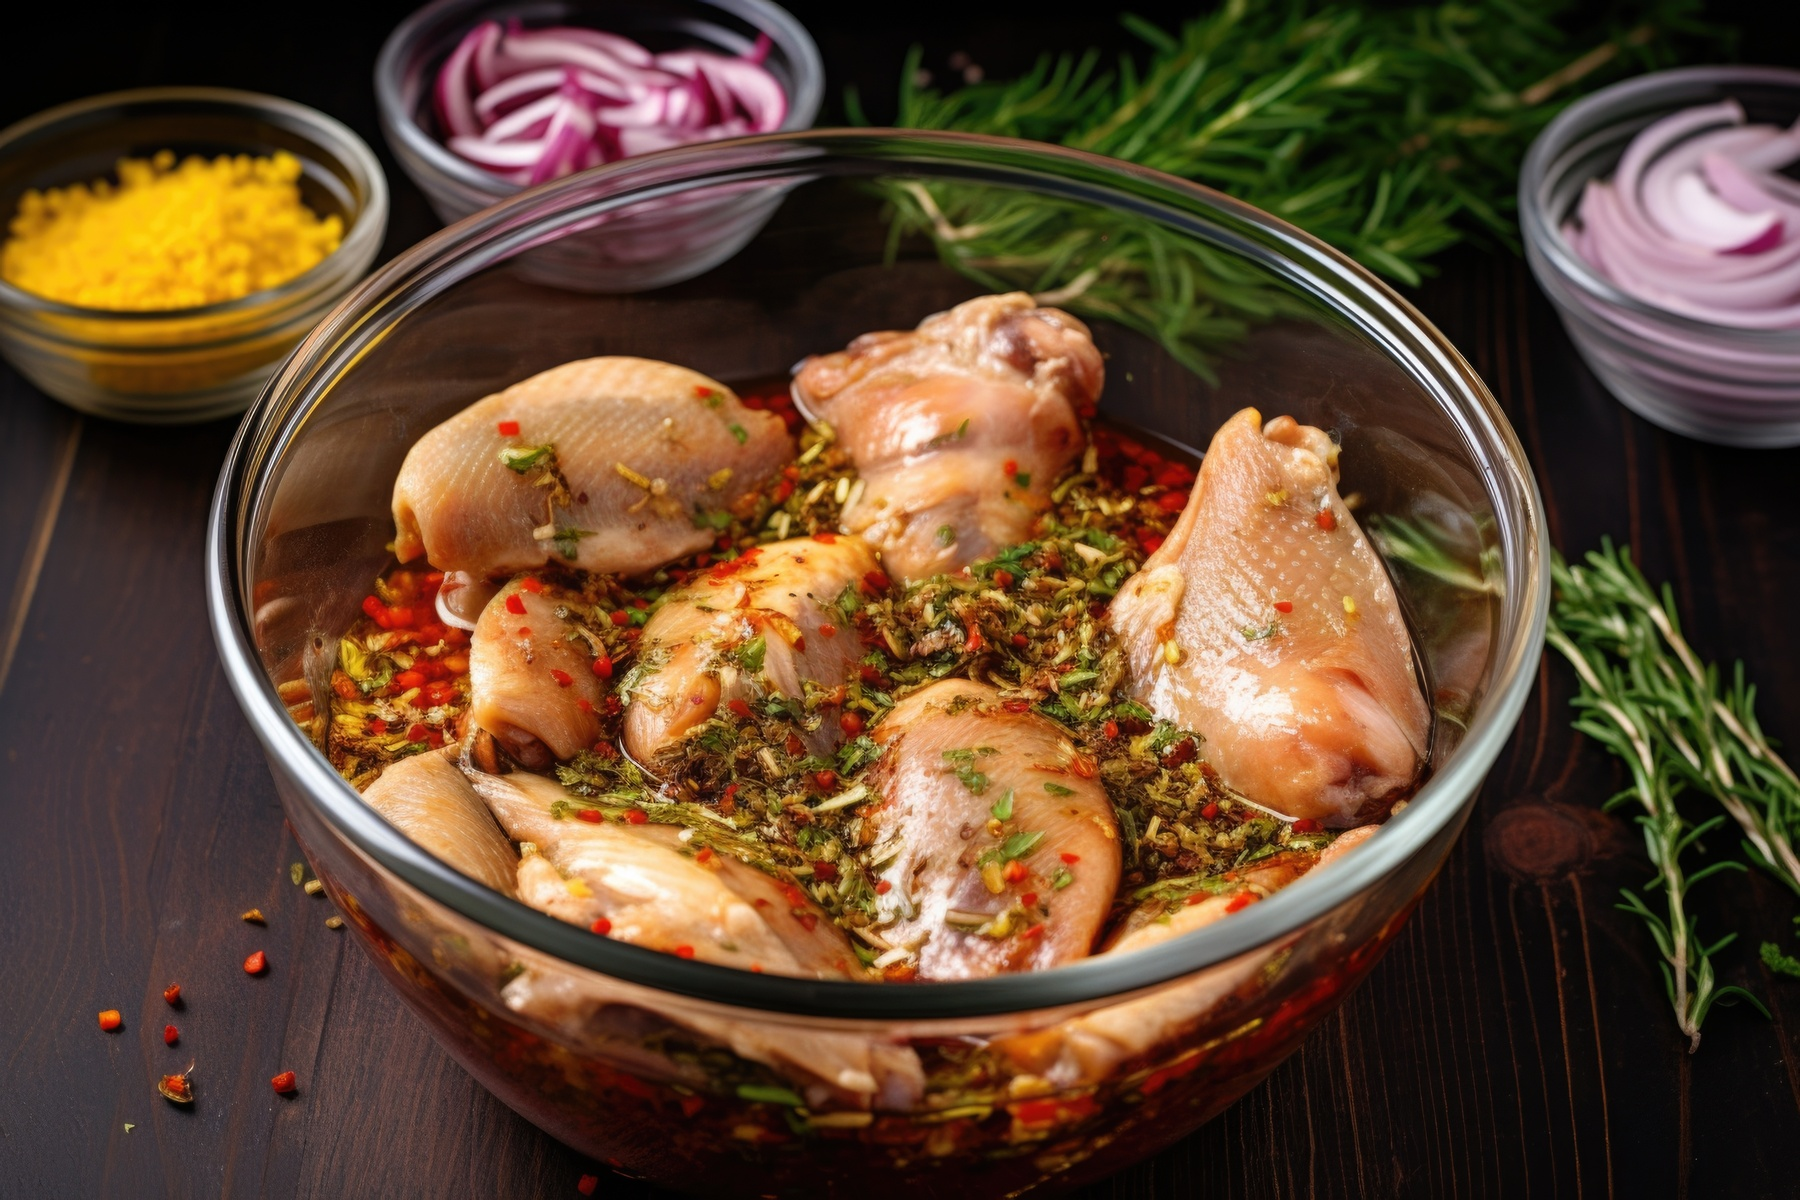 Marinated chicken in a flavourful blend of traditional Indian spices, ready for cooking